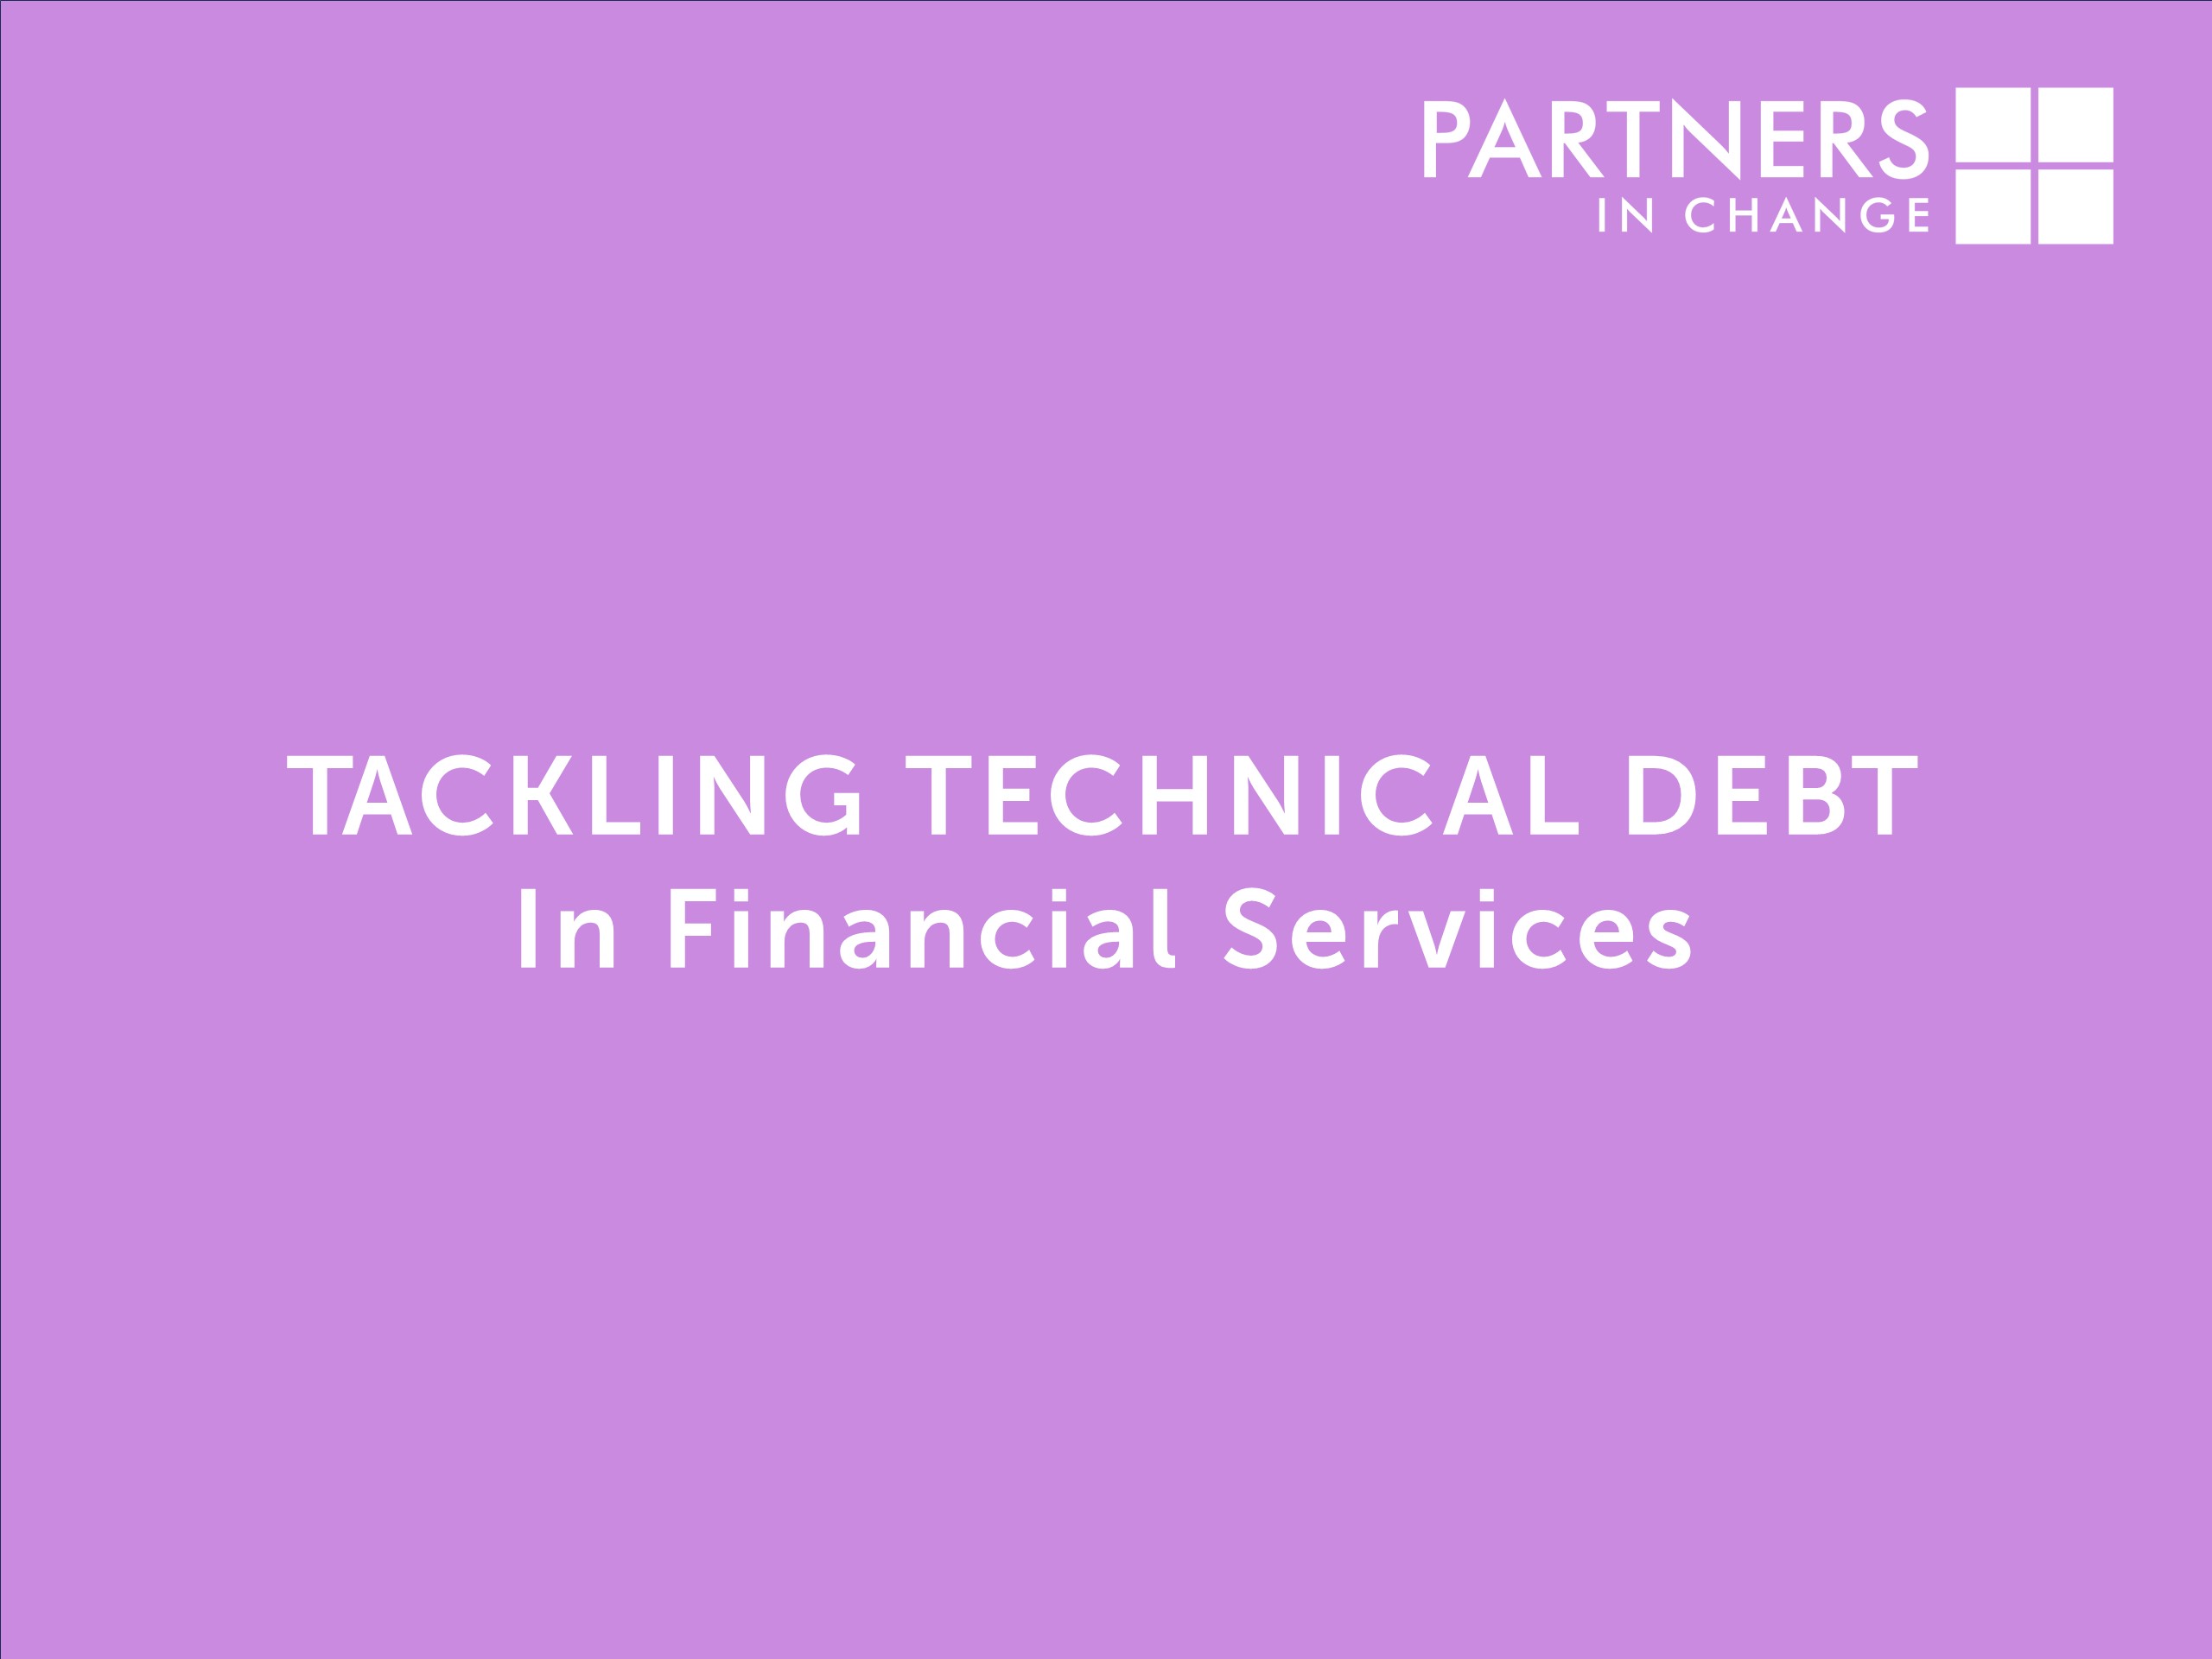 Tackling Technical Legacy Debt in Financial Services